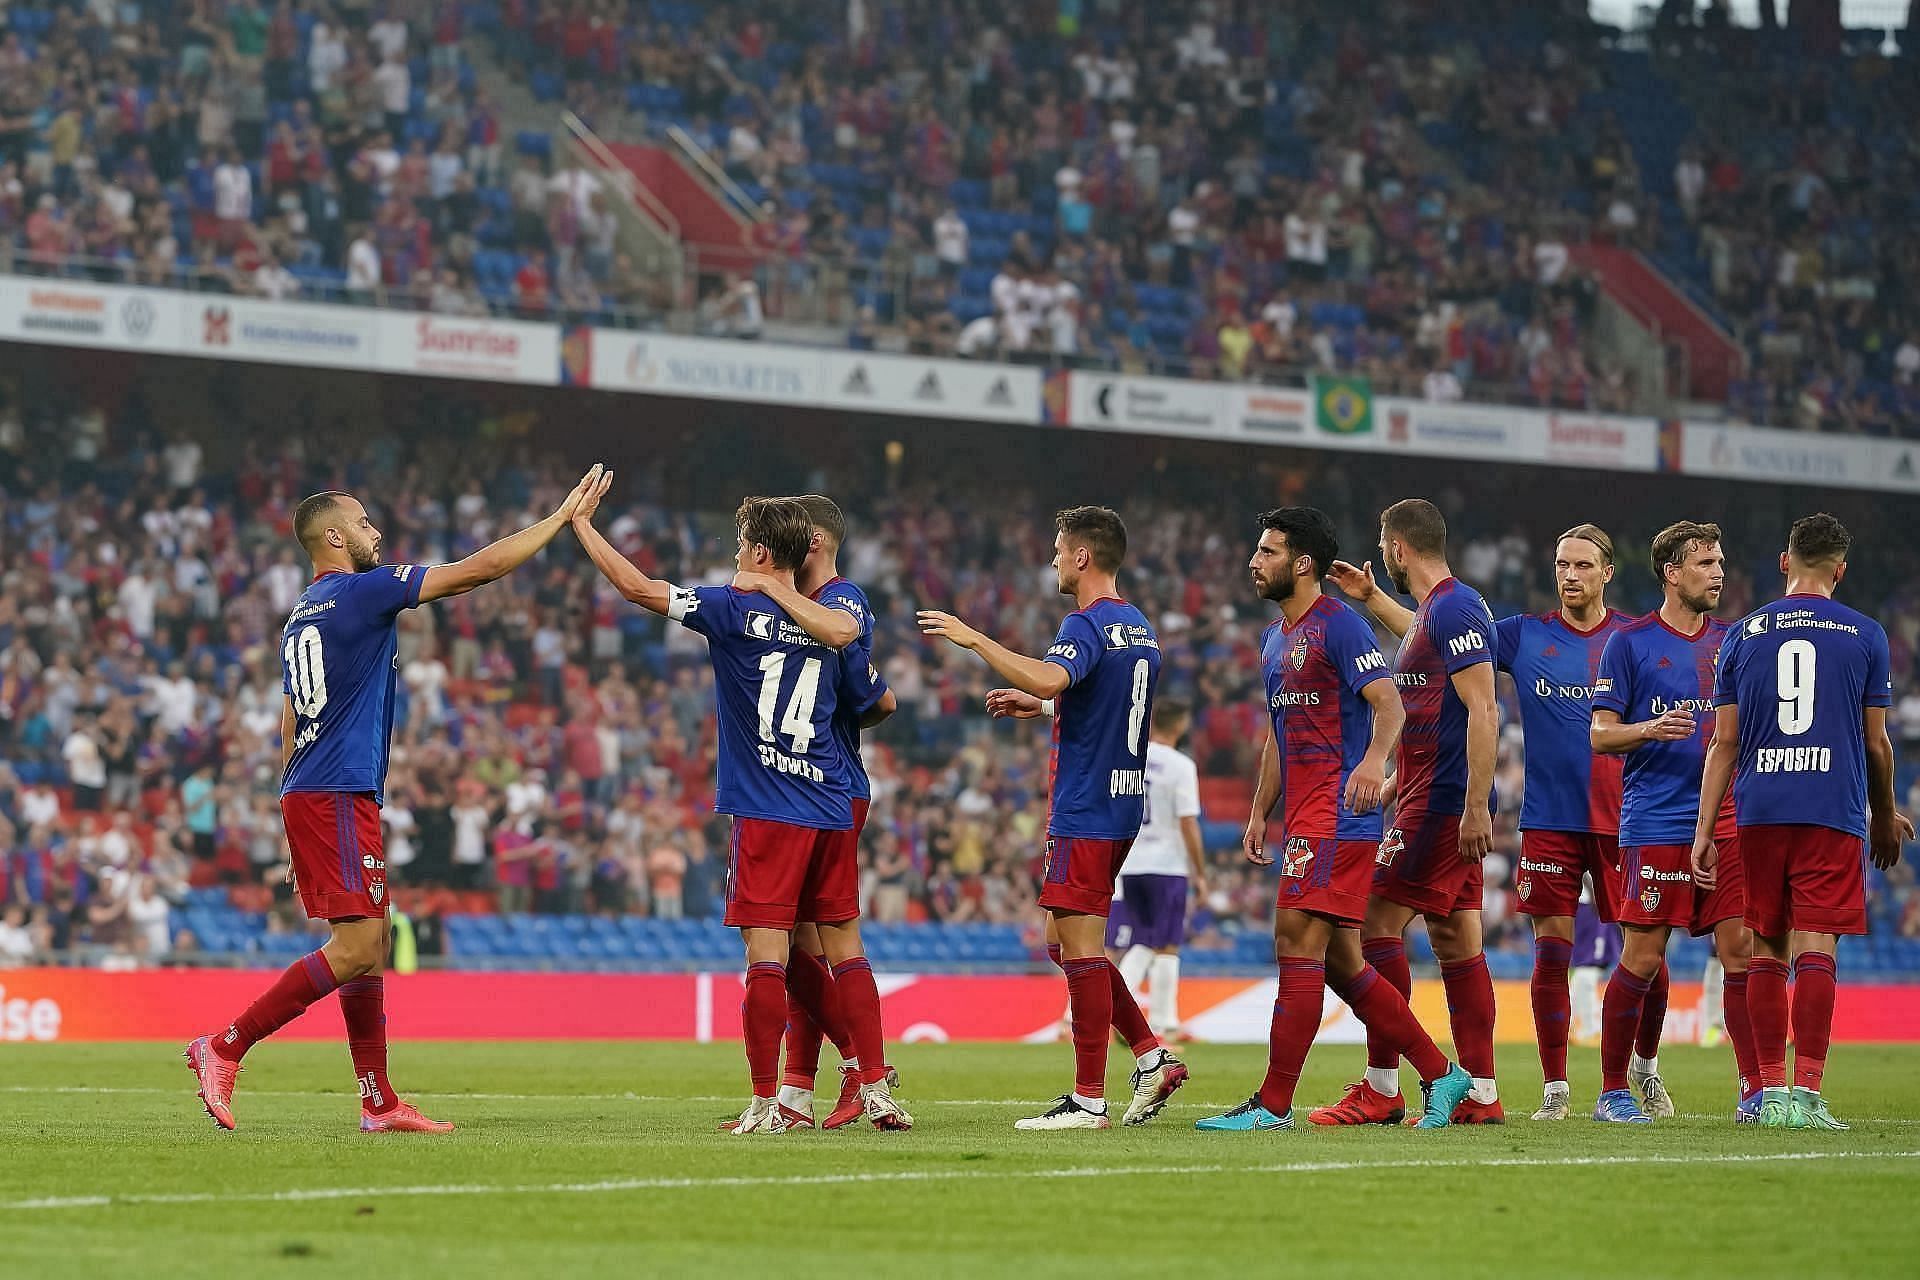 Basel will face Stade-Lausanne on Saturday 